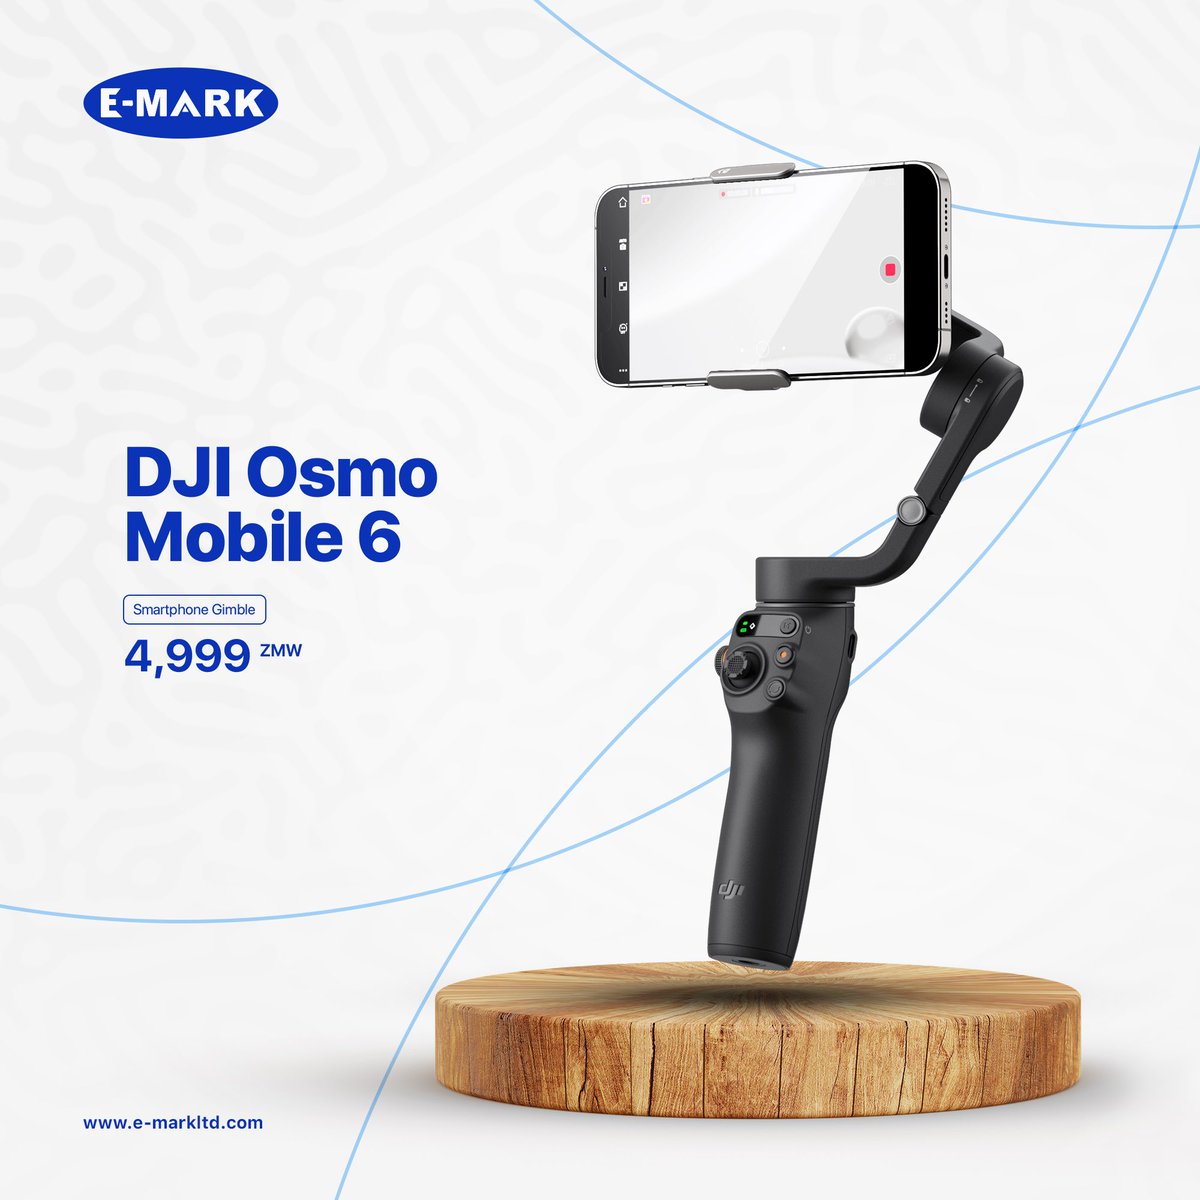 The DJI Osmo Mobile pairs smooth routine with helpful software features that produce pro-grade video results from your phone. Some of the other features to expect are a magnetic phone mount for quick setup, zoom/focus wheel and extendable selfie stick. #ConnectingPeople